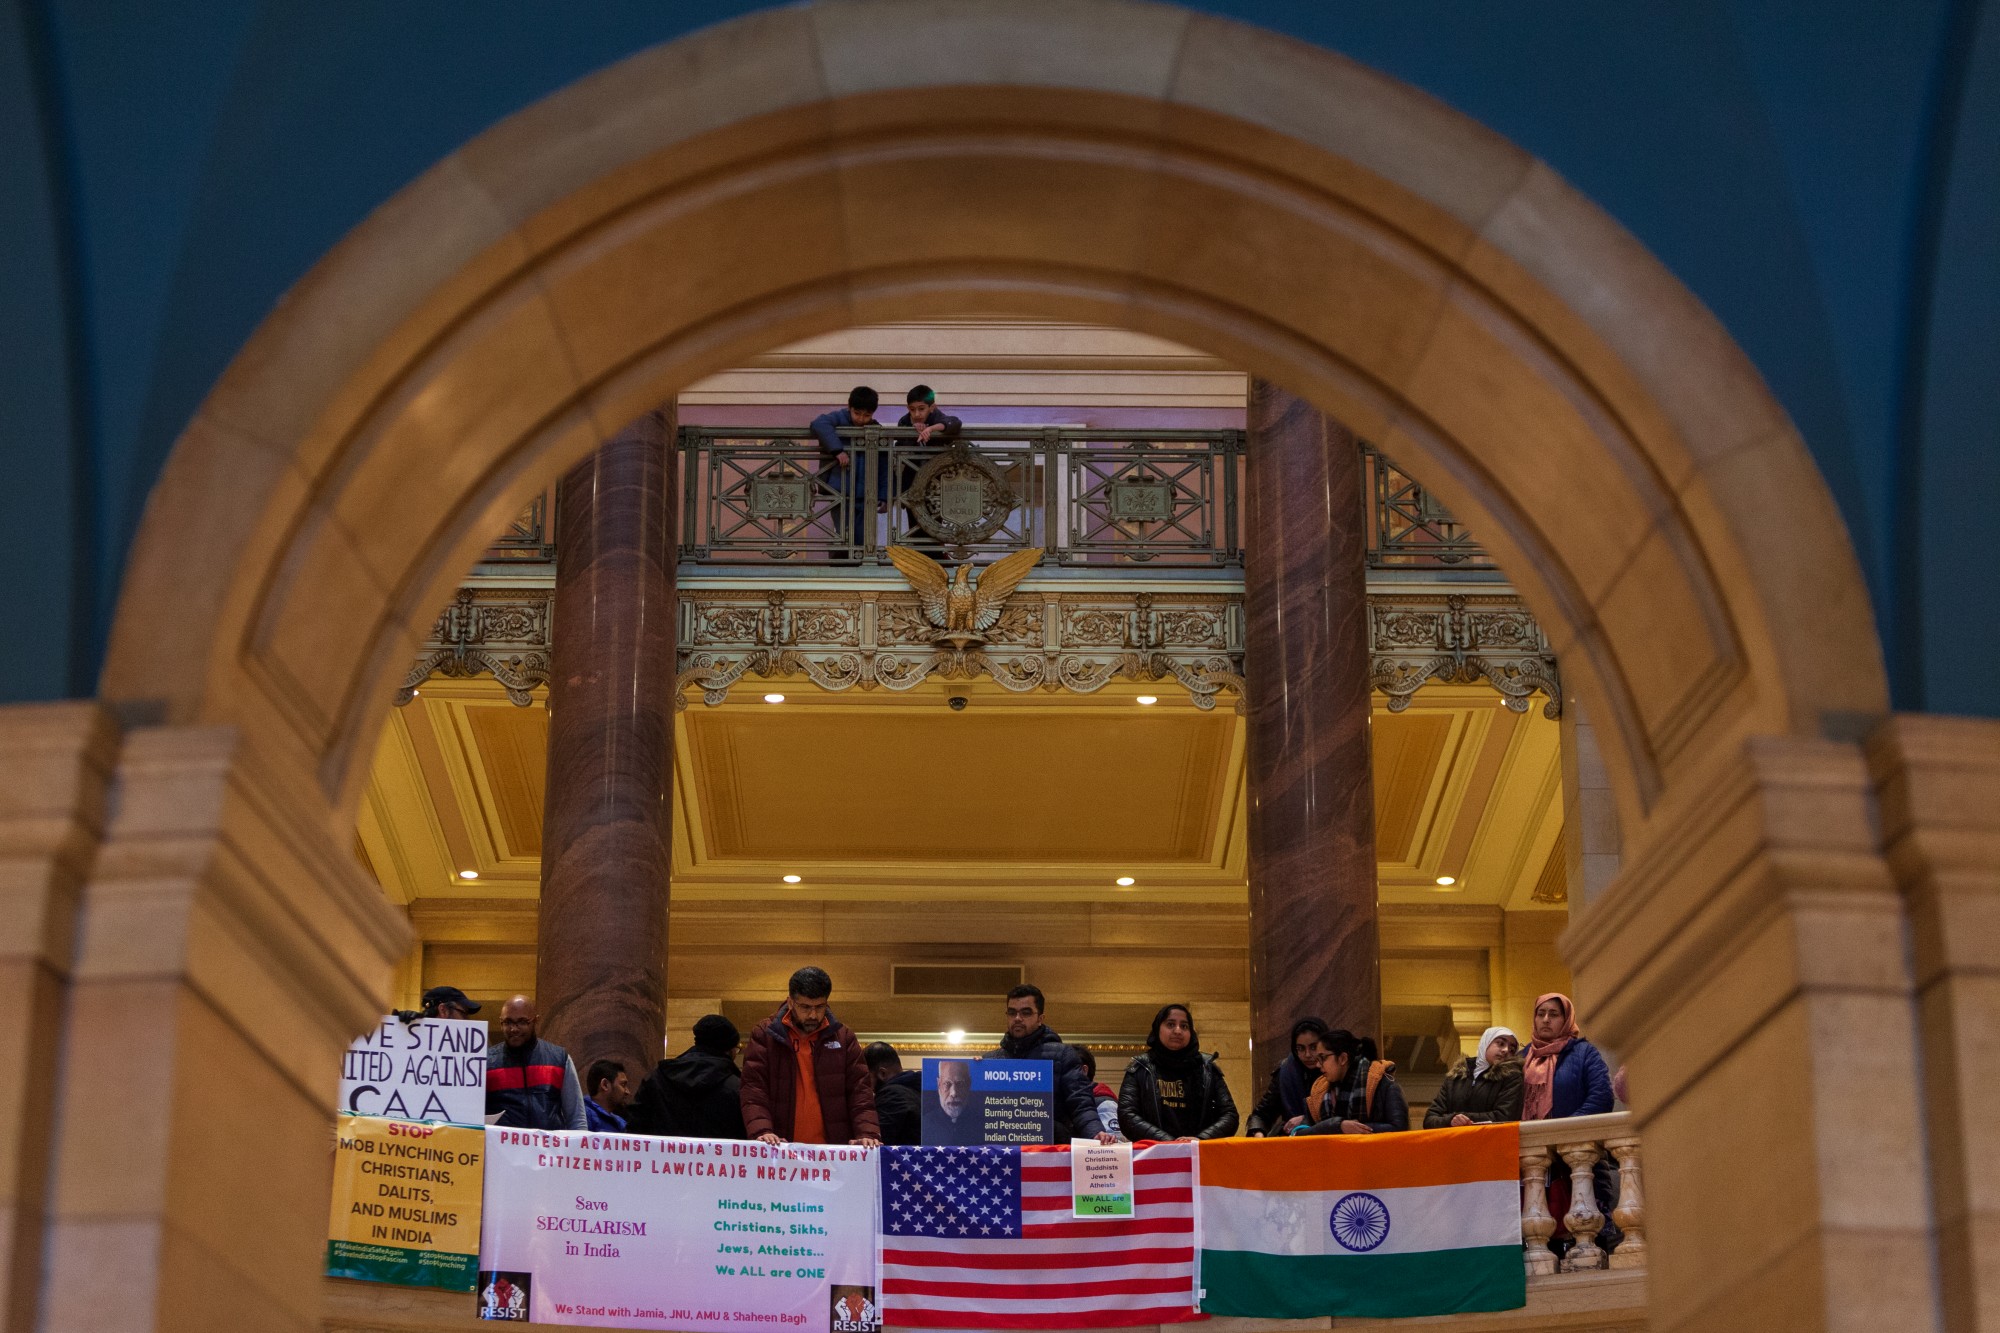 Protestors drape Indian and U.S. flags over the balcony of the rotunda at an event opposing Indias recent passage of the Citizenship Amendment Act at the Minnesota State Capitol Building on Sunday, Jan. 26. This legislation offers Indian citizenship to refugees of several religious groups, but does not apply to Muslims, despite their making up nearly 15% of the Indian population. (Kamaan Richards / Minnesota Daily)